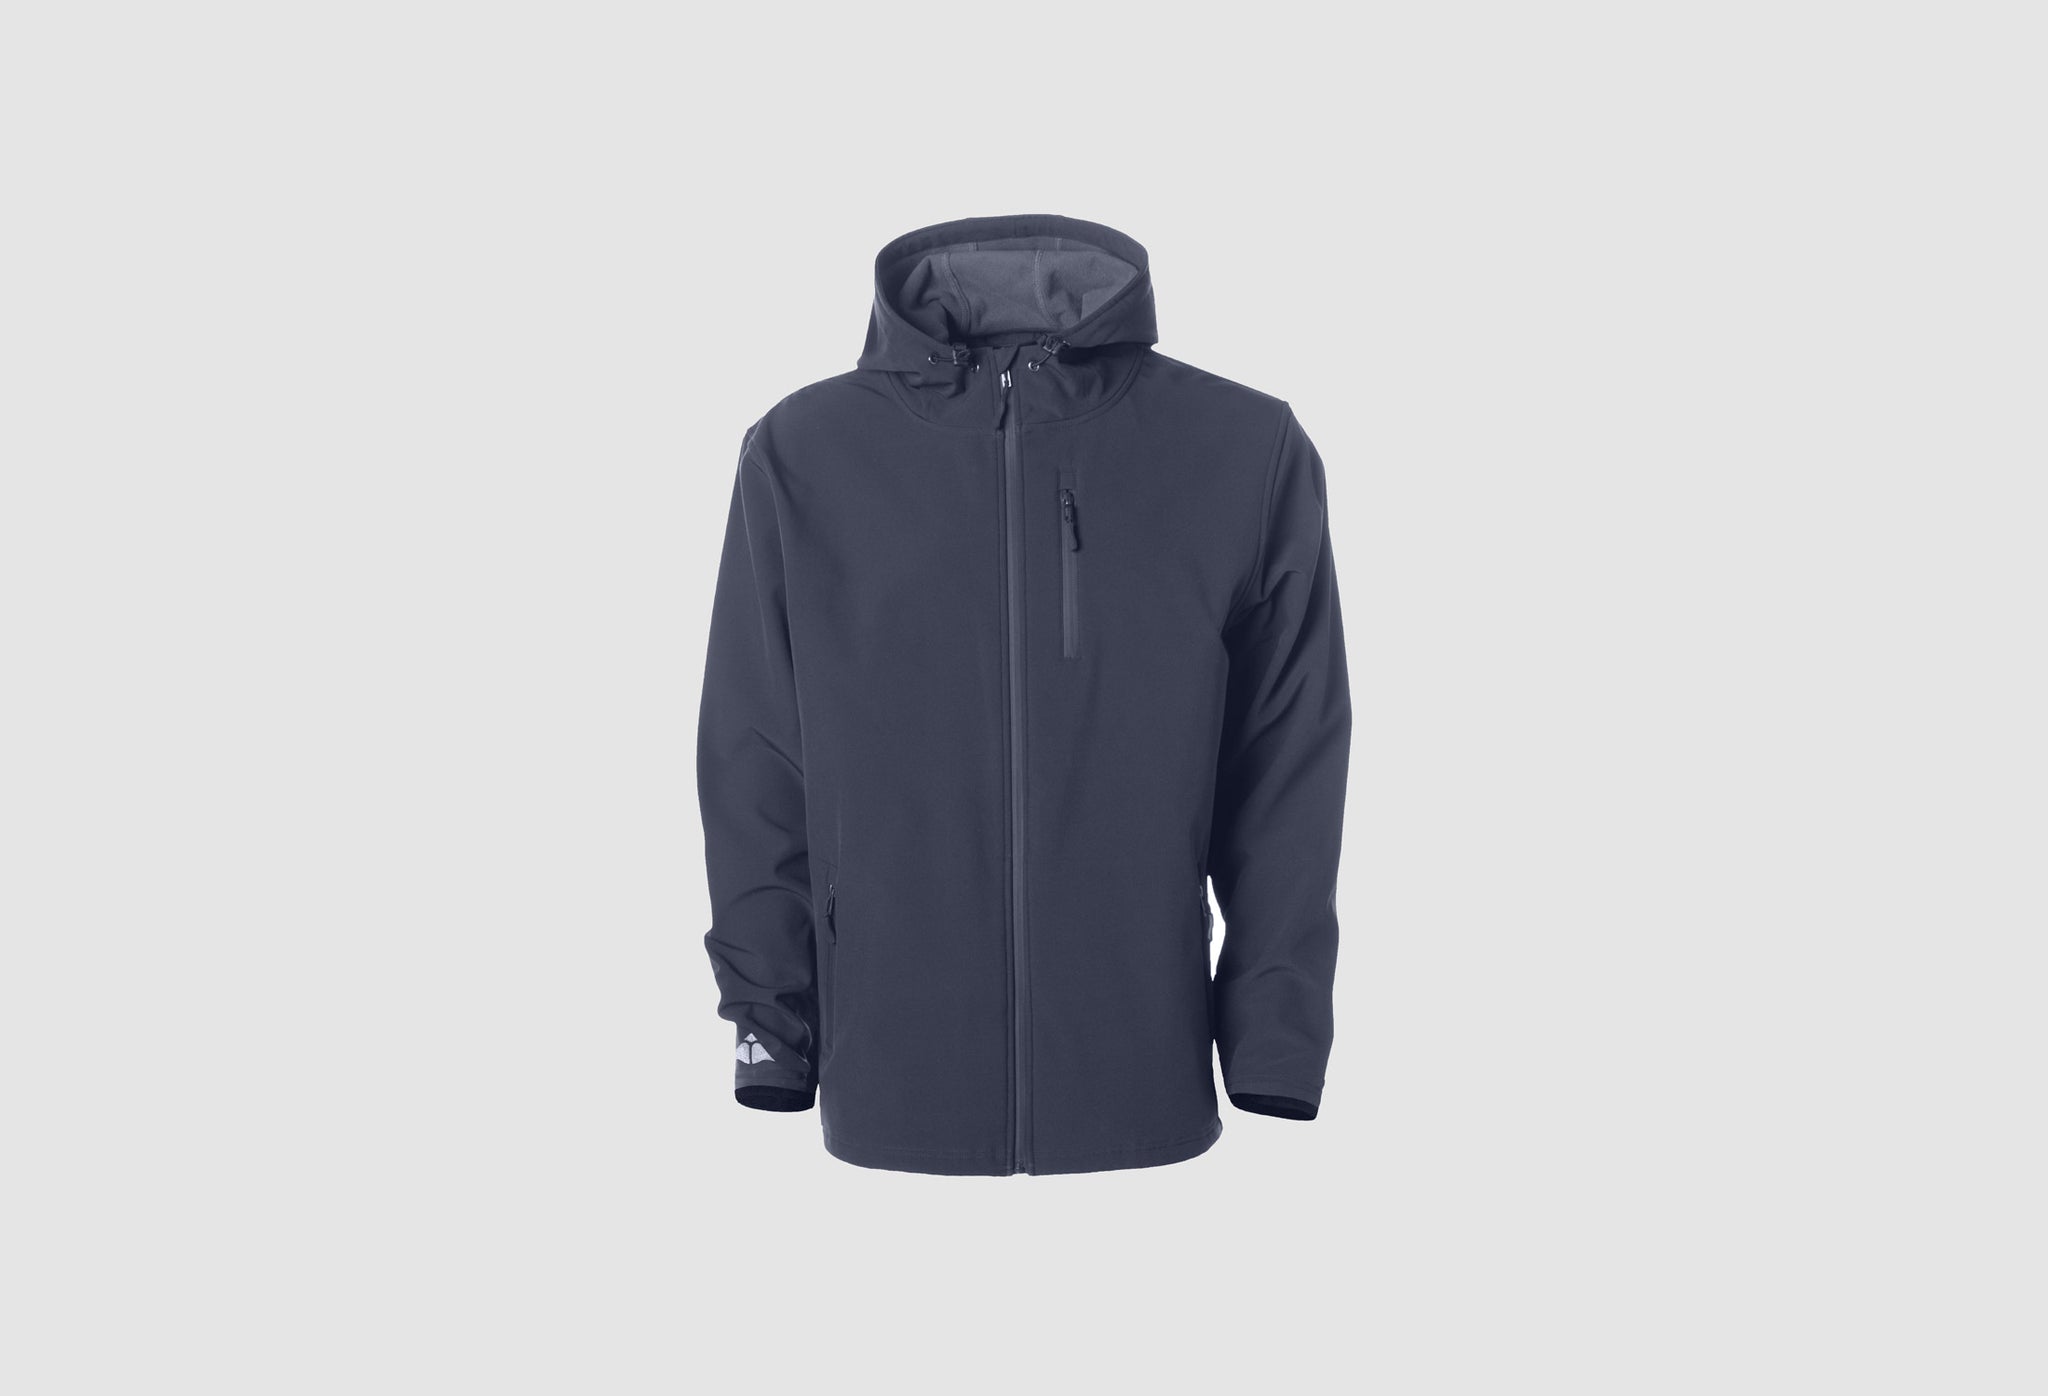 Fire Kai Weather Resistant Cousteau Jacket in Navy Blue 